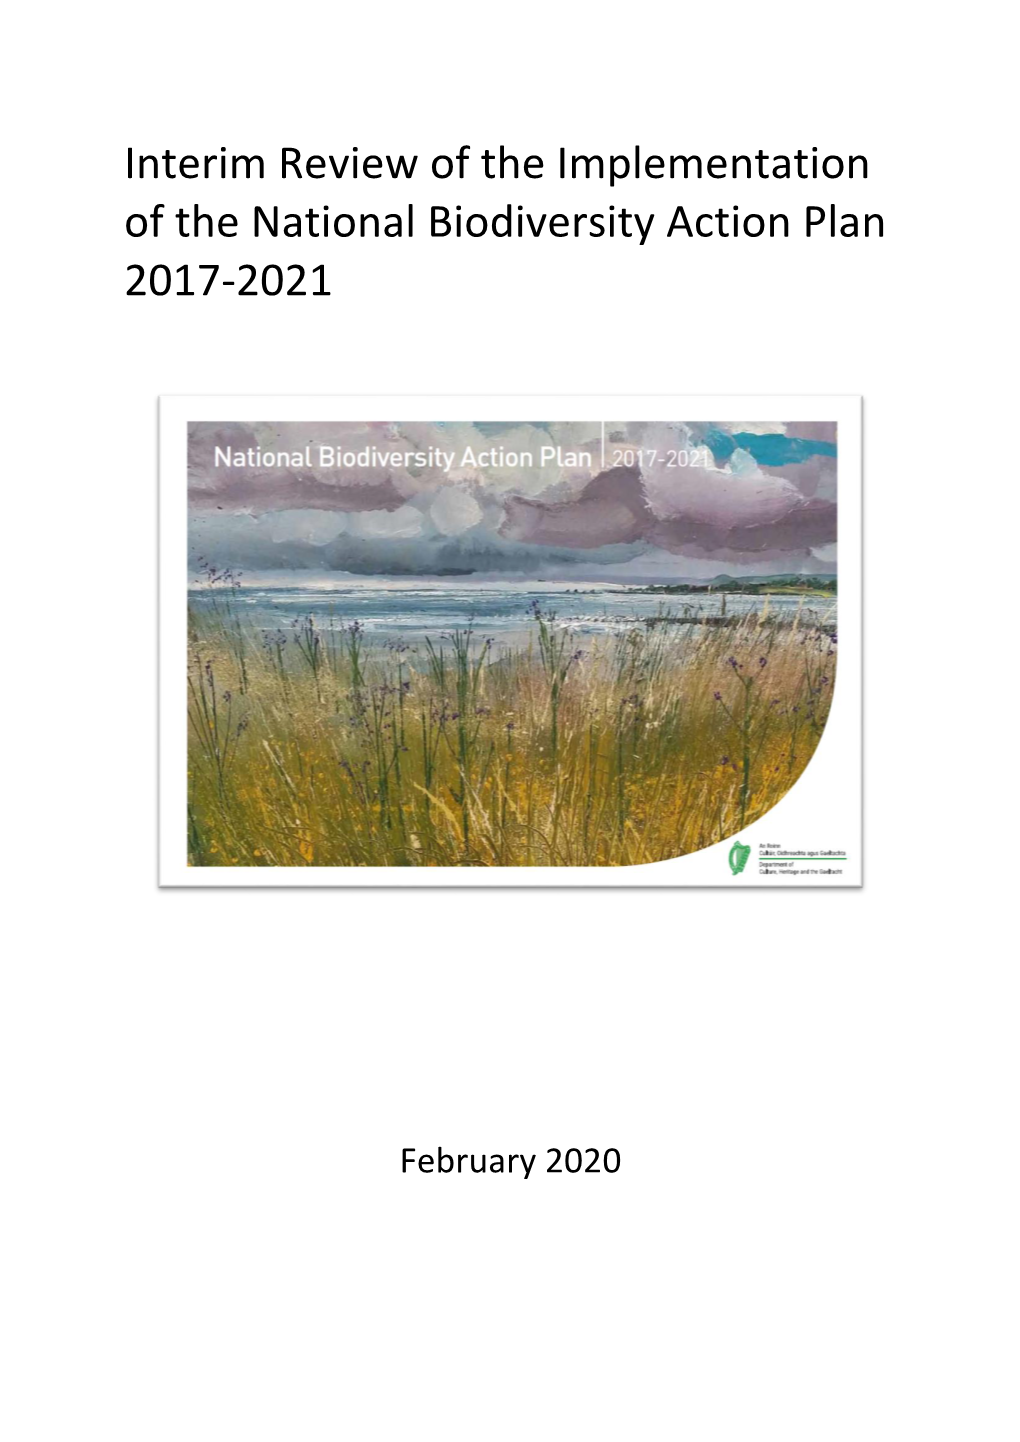 Interim Review of the Implementation of the National Biodiversity Action Plan 2017-2021